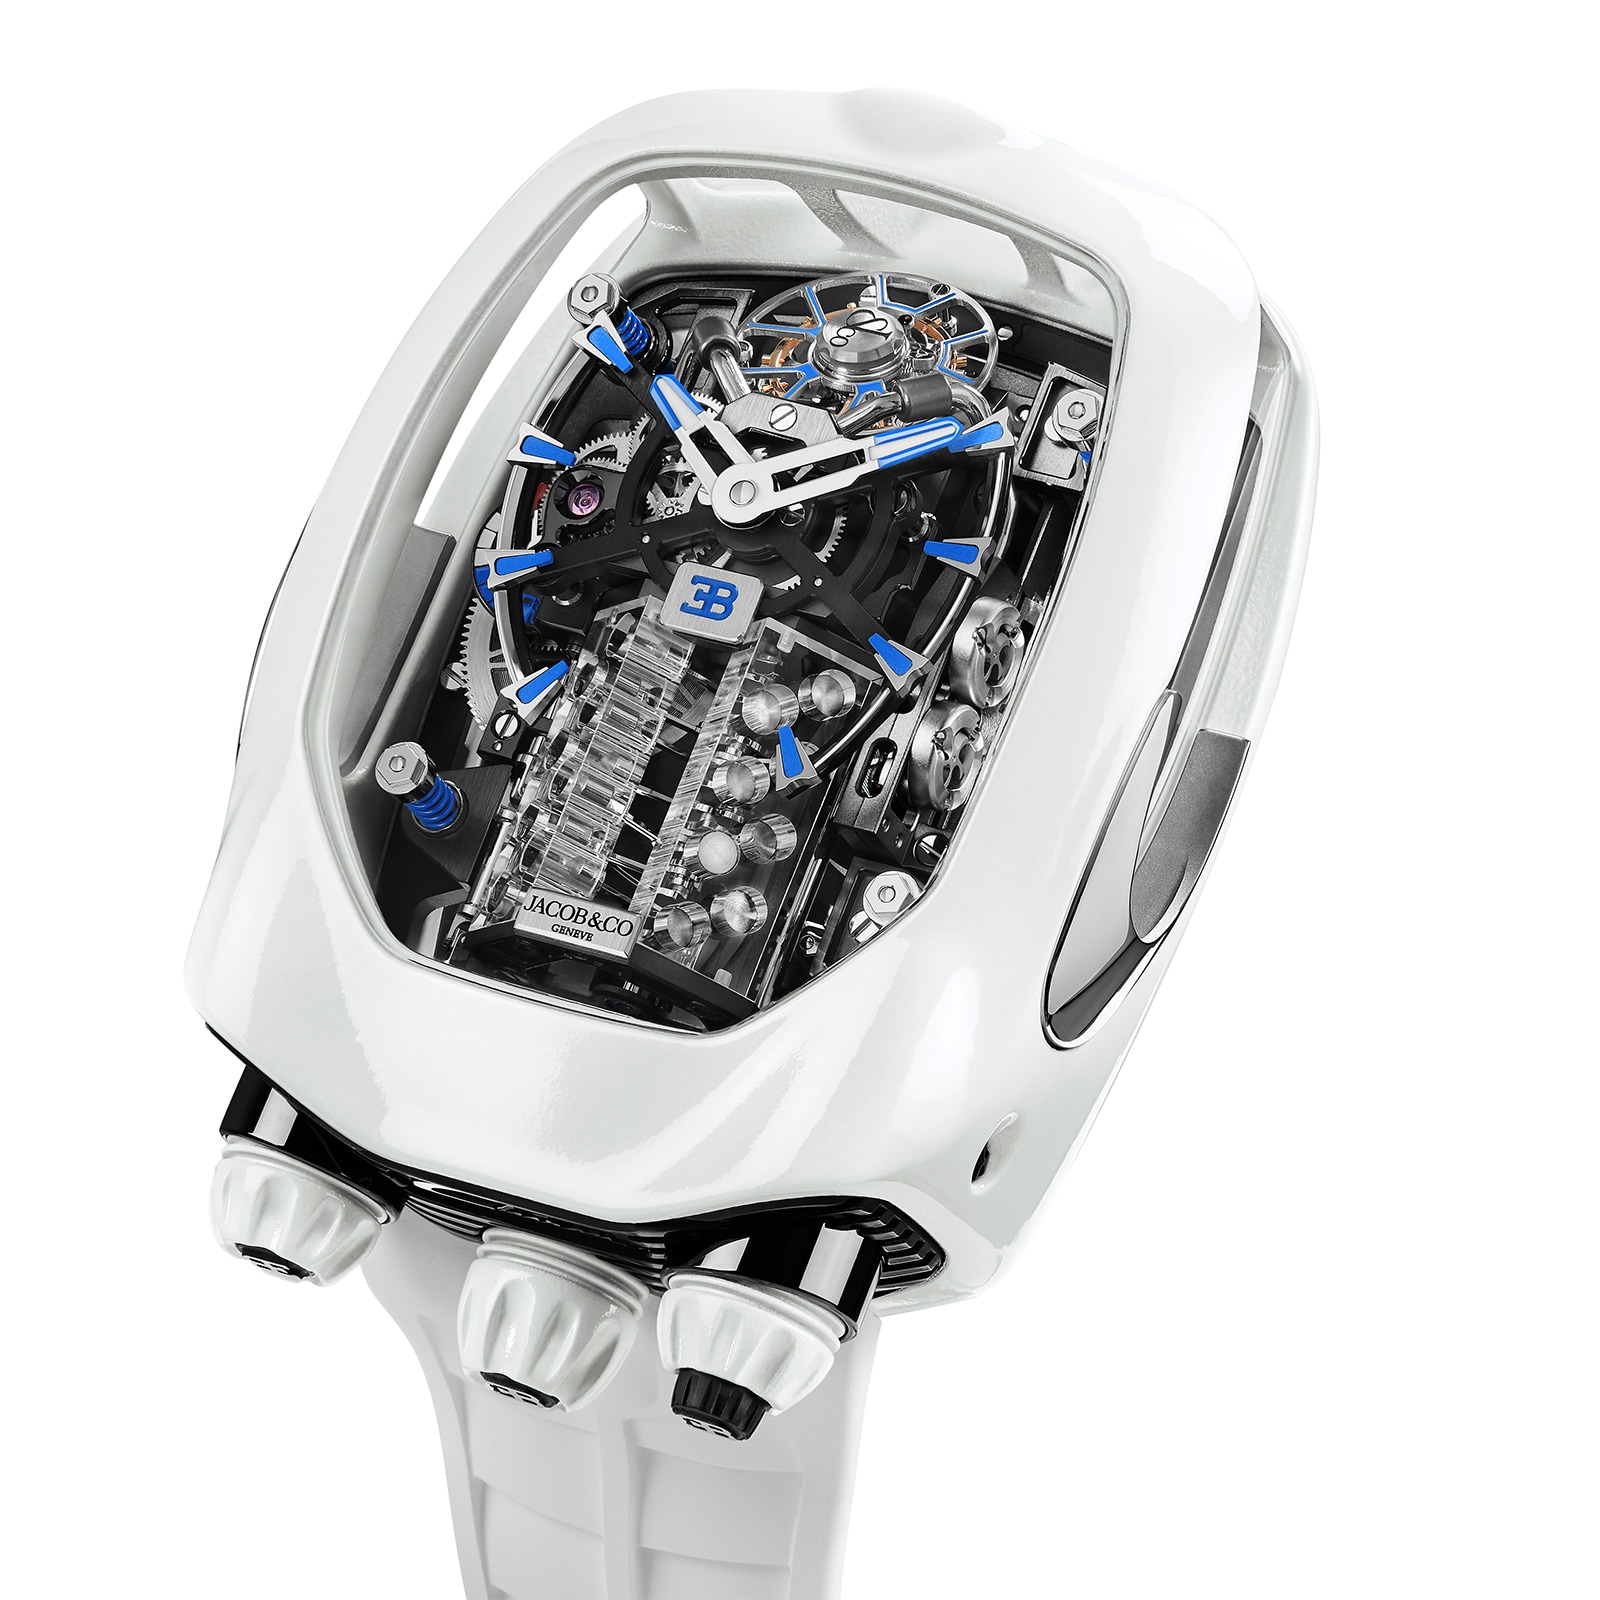 Jacob & Co. Models a Timepiece After the Engine of a Bugatti Chiron – Robb  Report